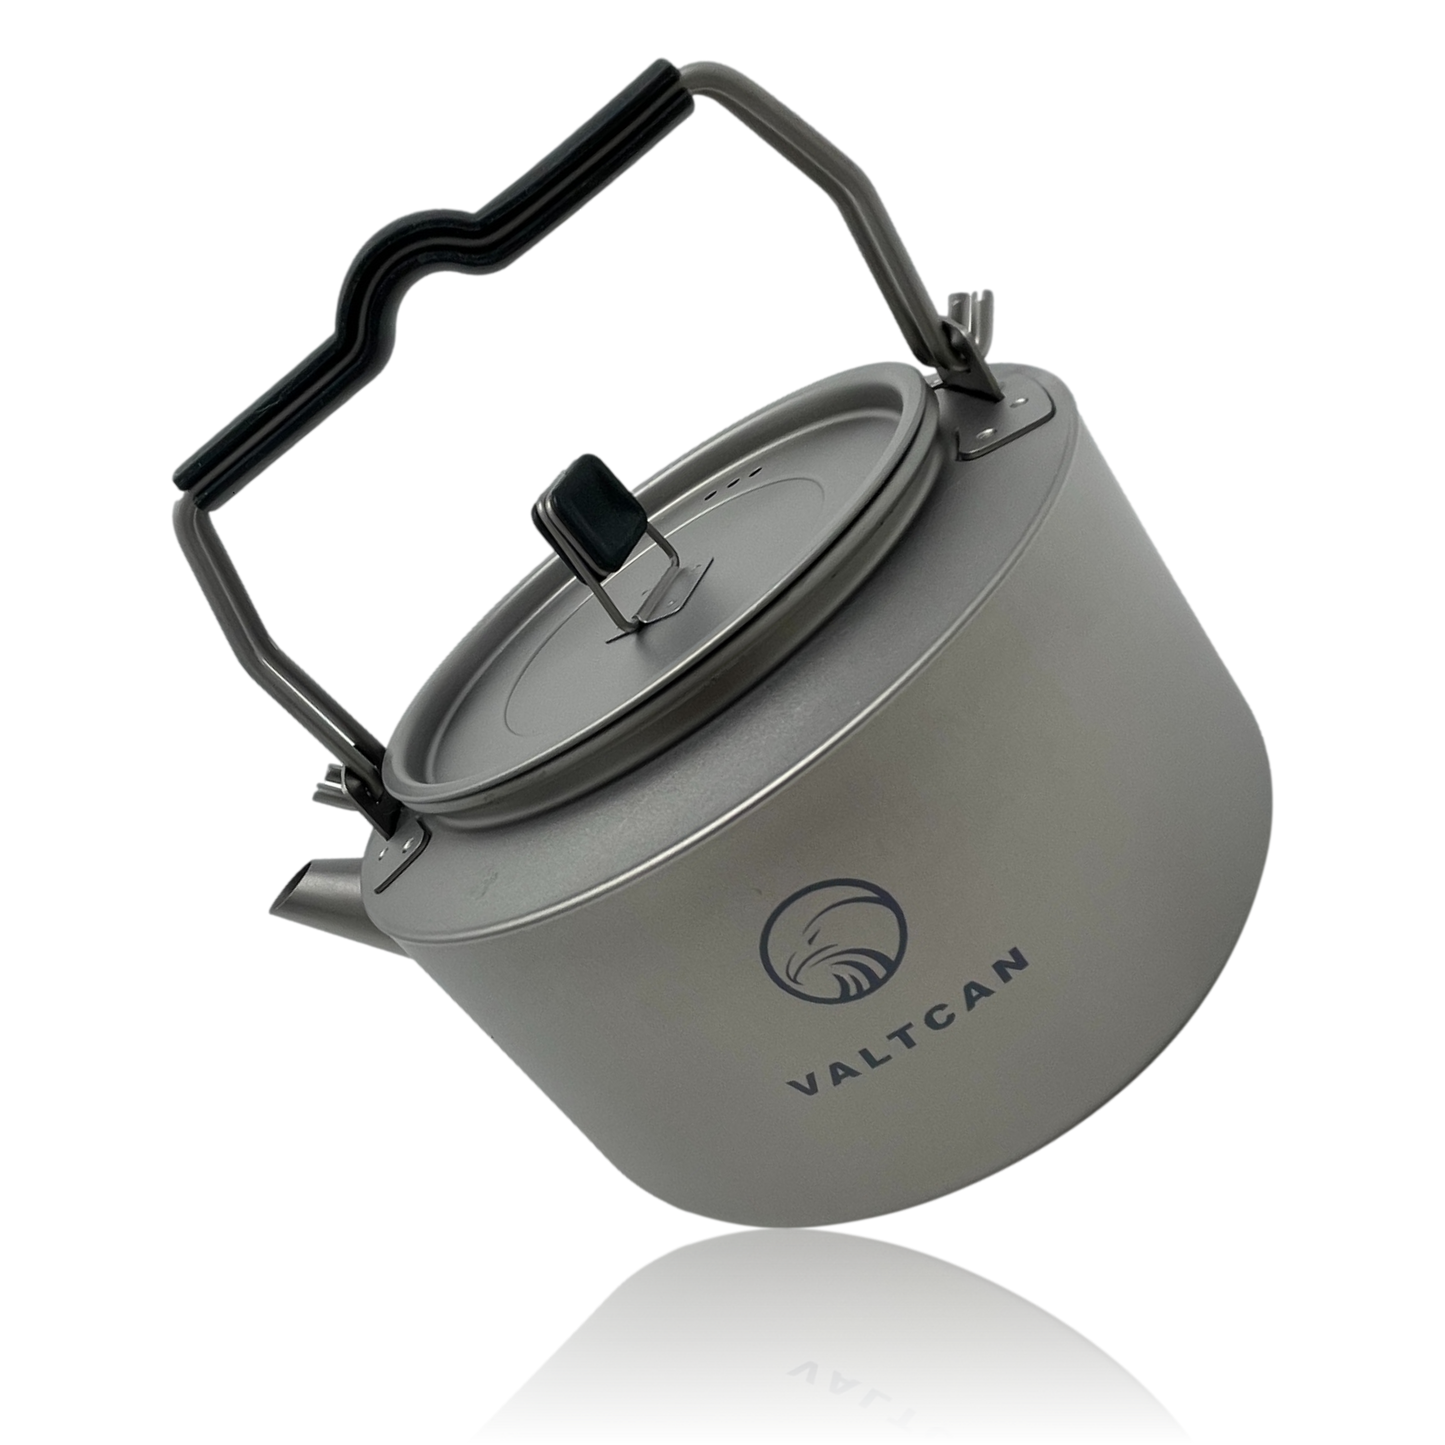 Valtcan 1000ml Titanium Kettle Pot Camping Water with Lid Handle Guards 340g